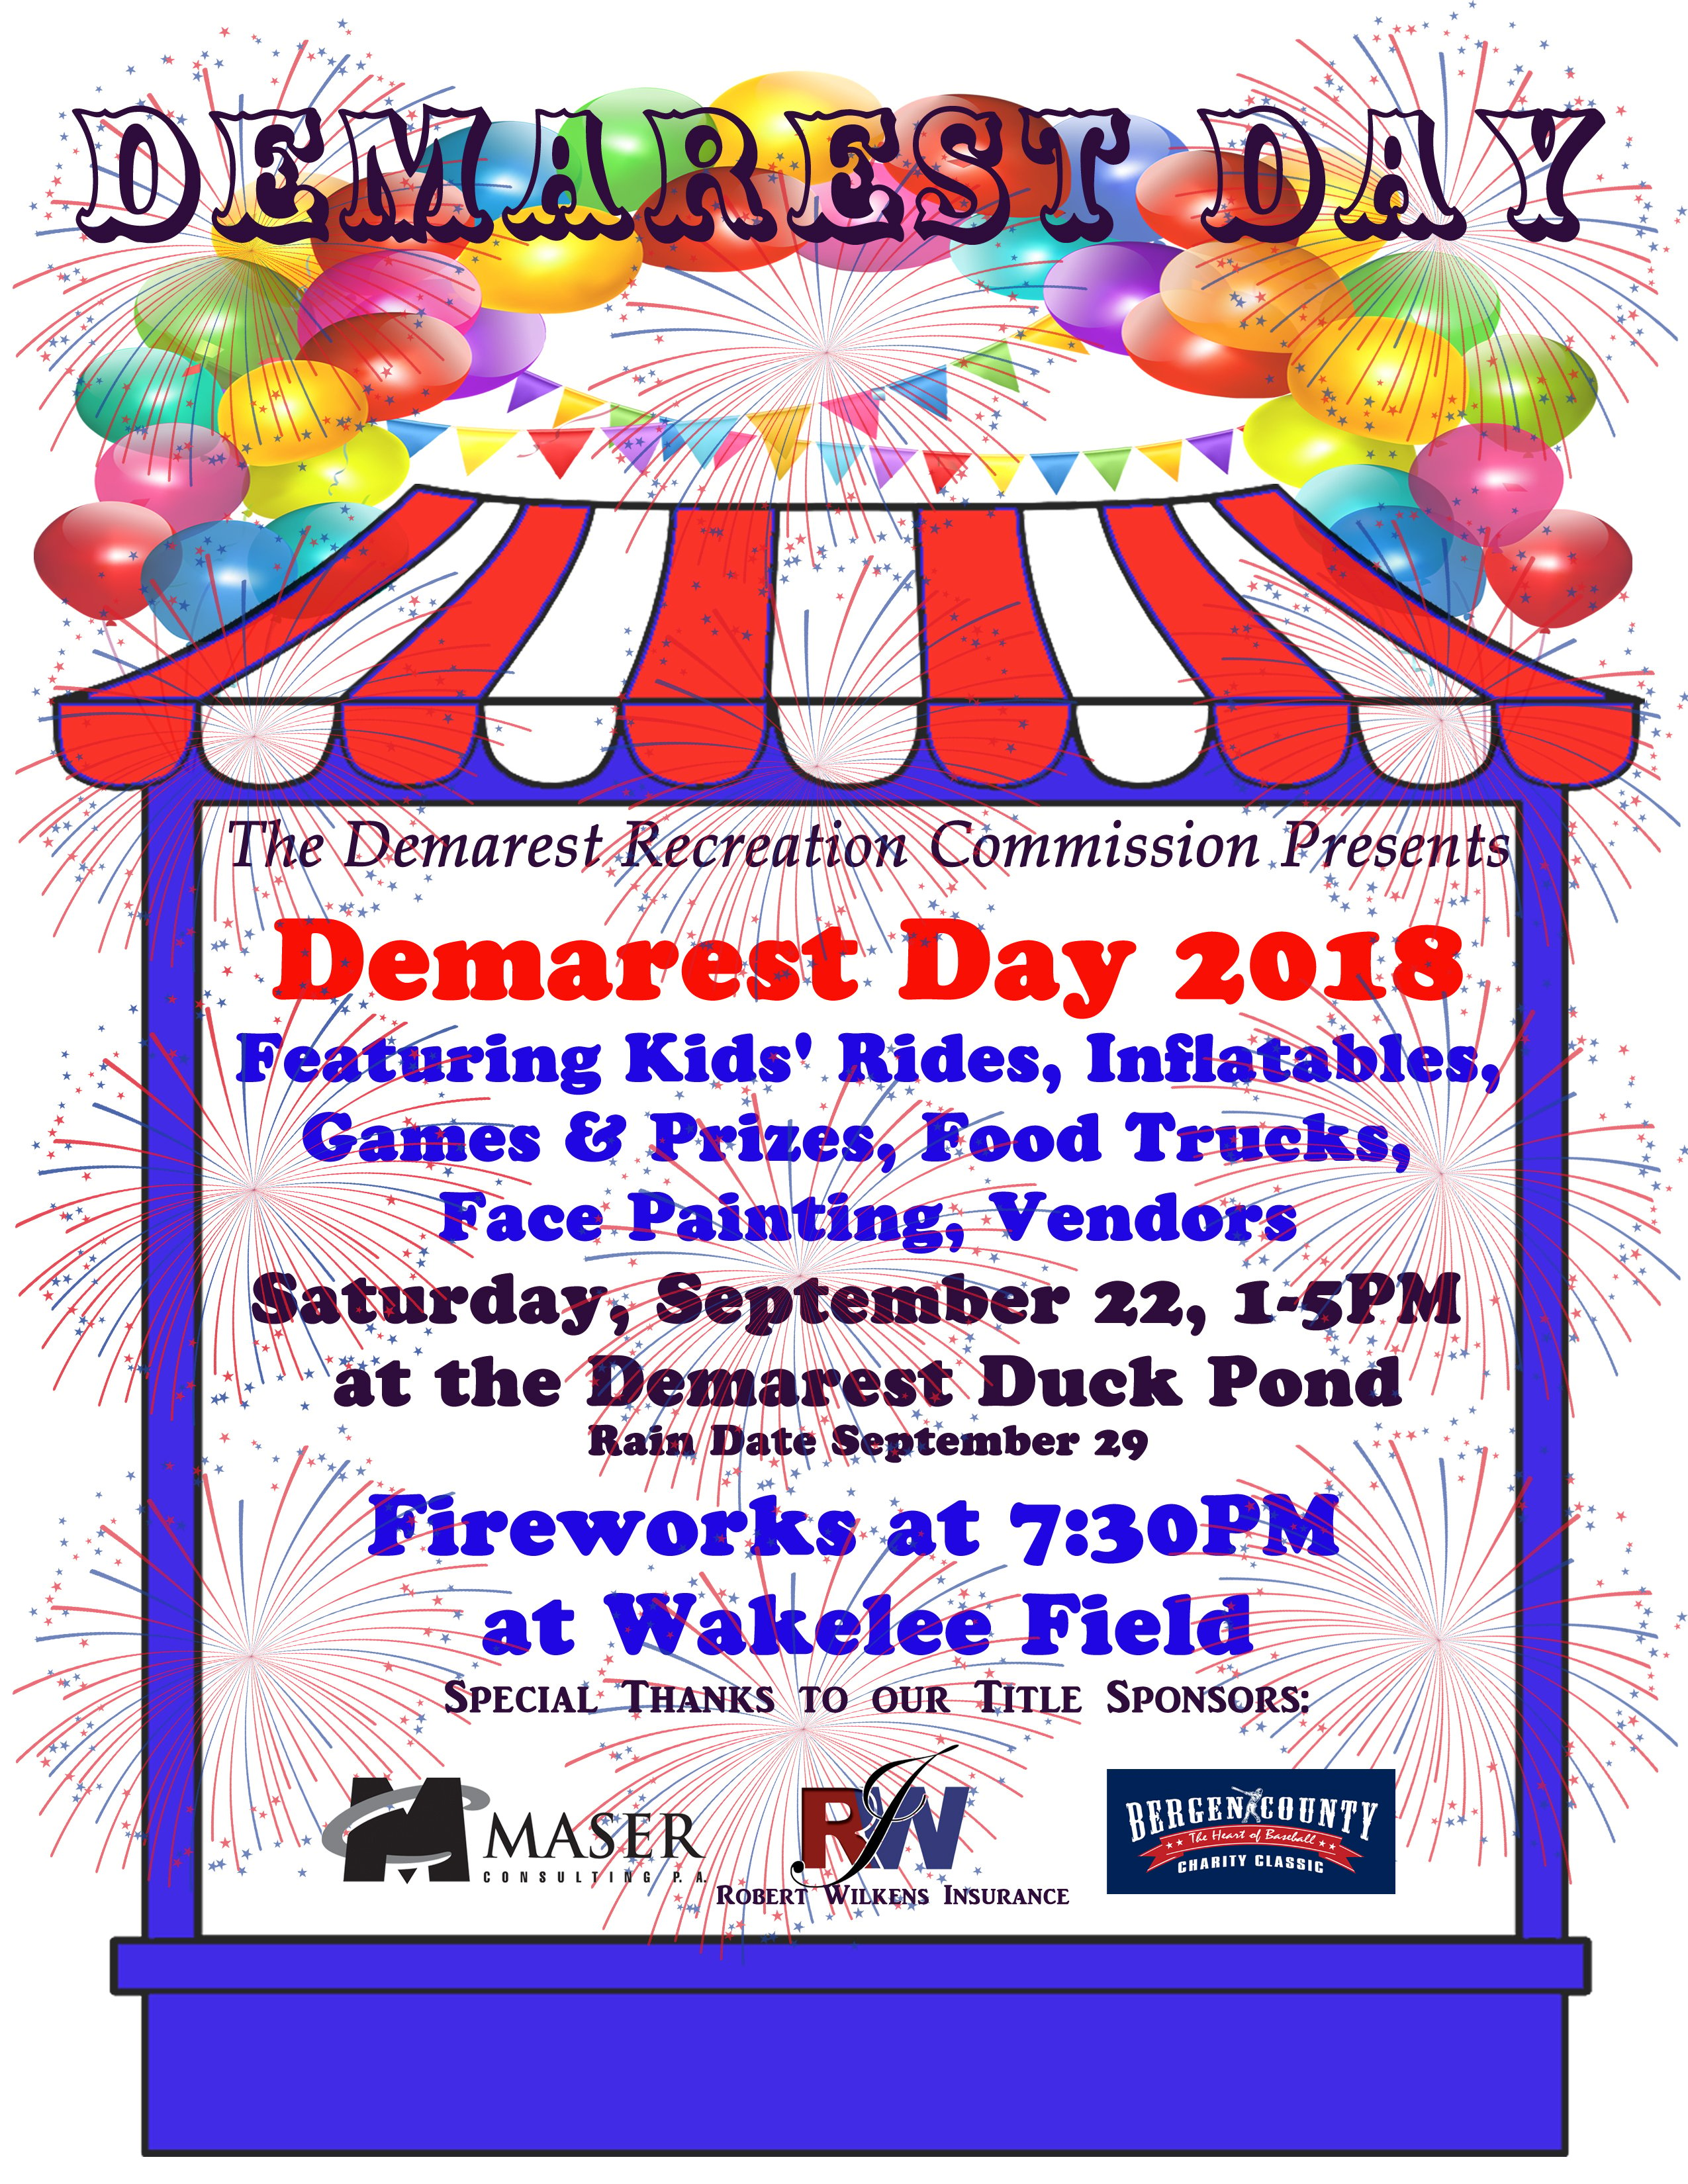 Celebrate the Fall Season at Demarest Day & Fireworks on September 22